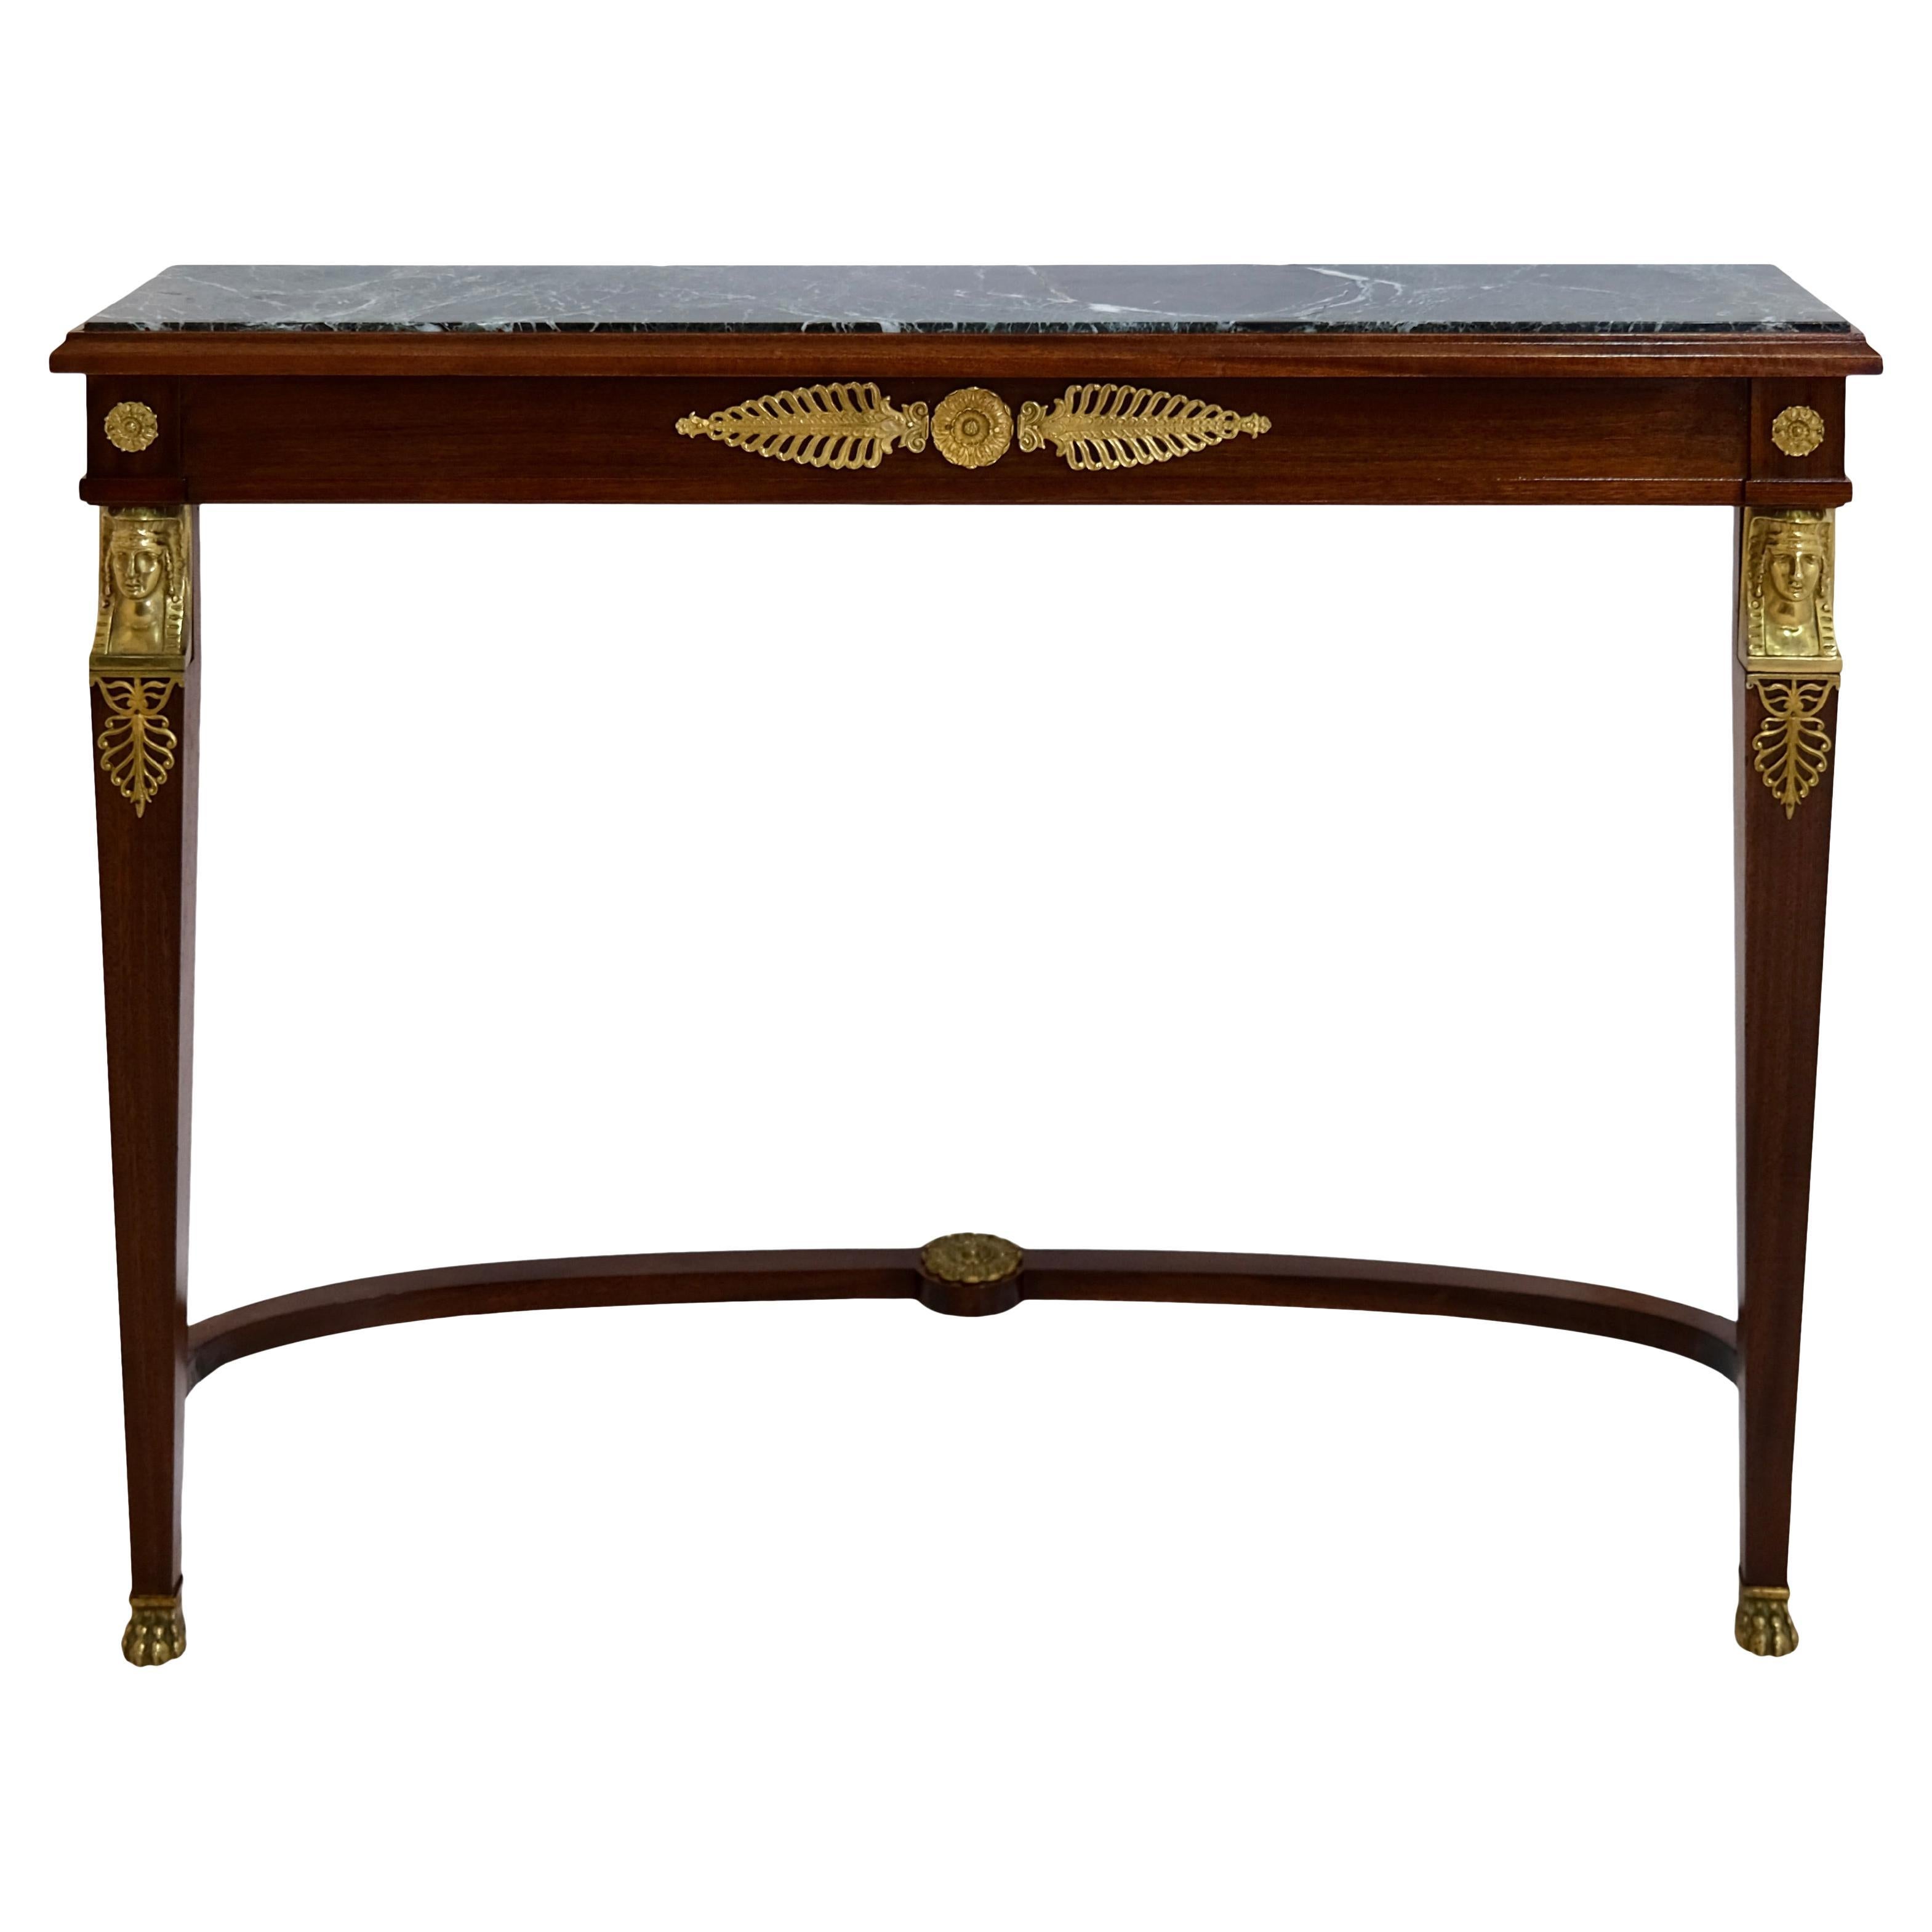 French 1850/60s Empire Console Table in Mahogany with Marble Top For Sale